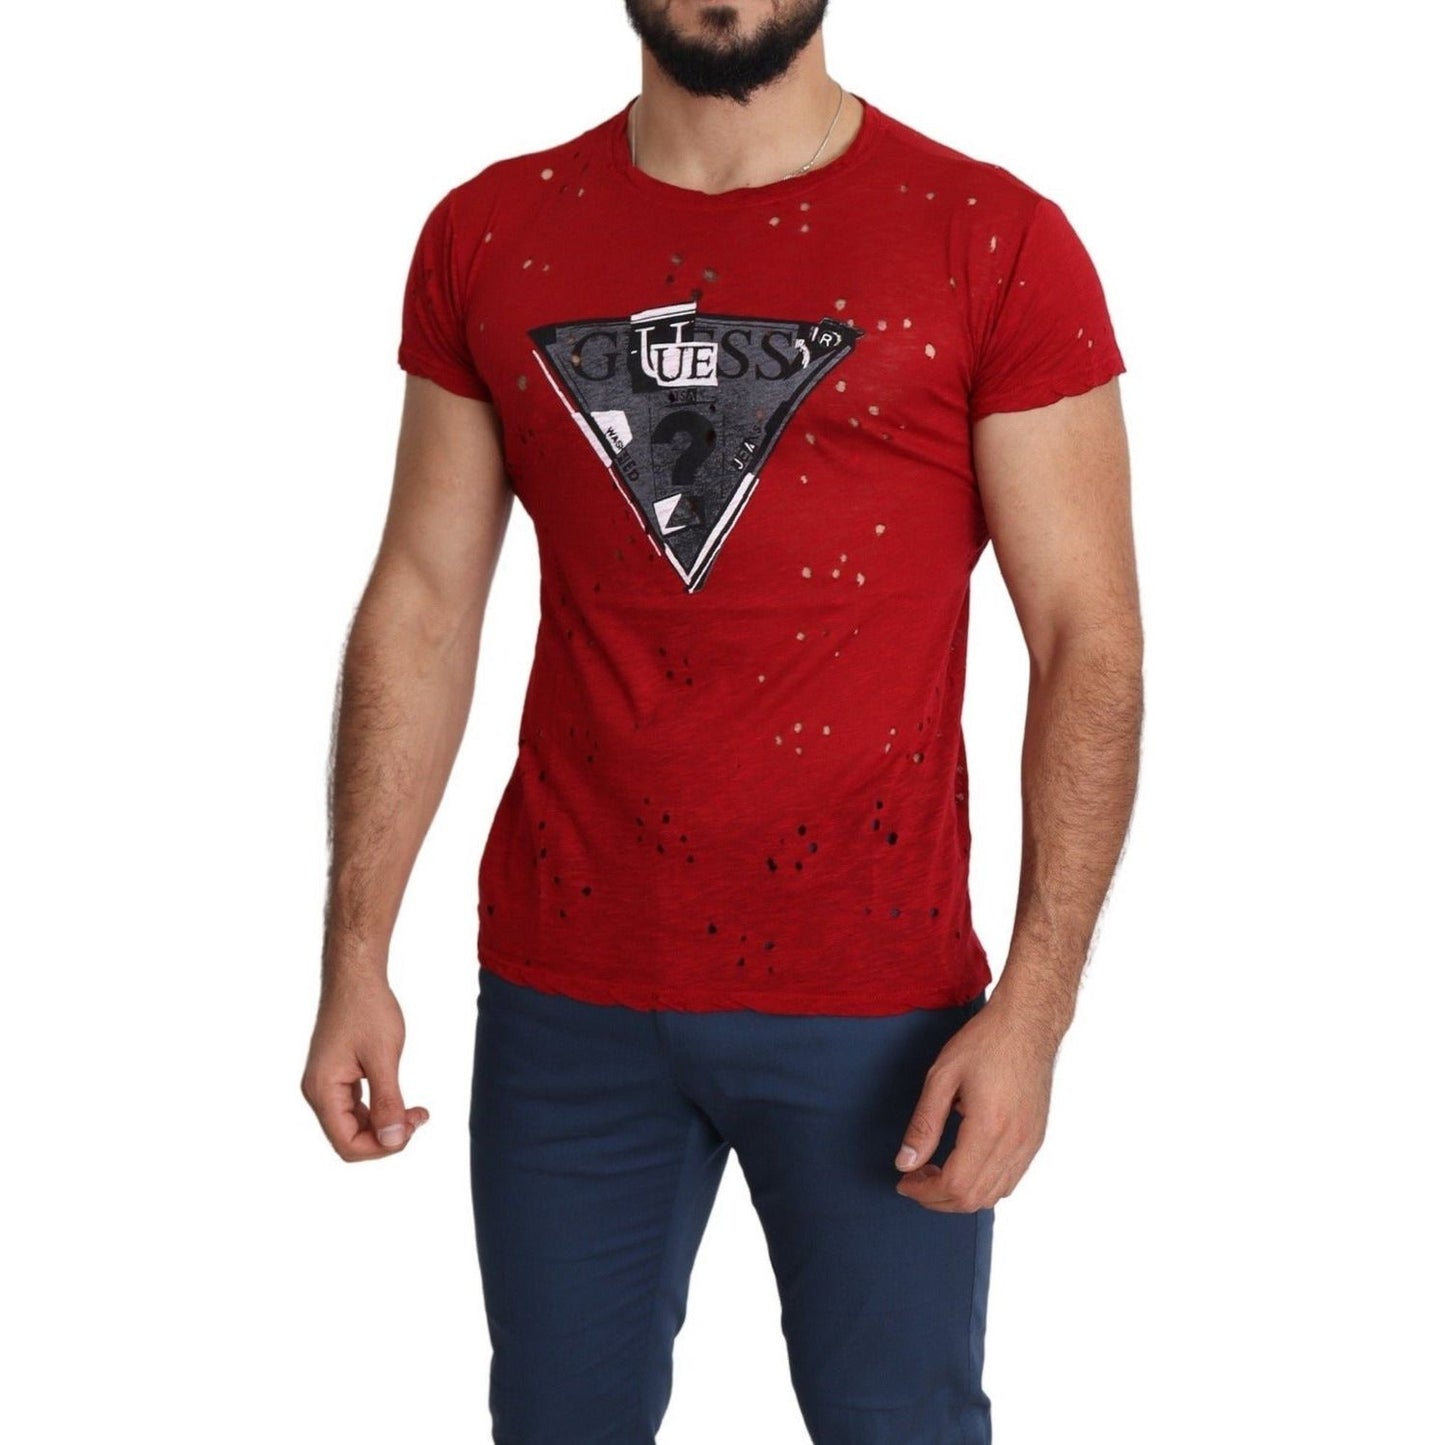 Guess Radiant Red Cotton Tee Perfect For Everyday Style red-cotton-logo-print-men-casual-top-perforated-t-shirt-1